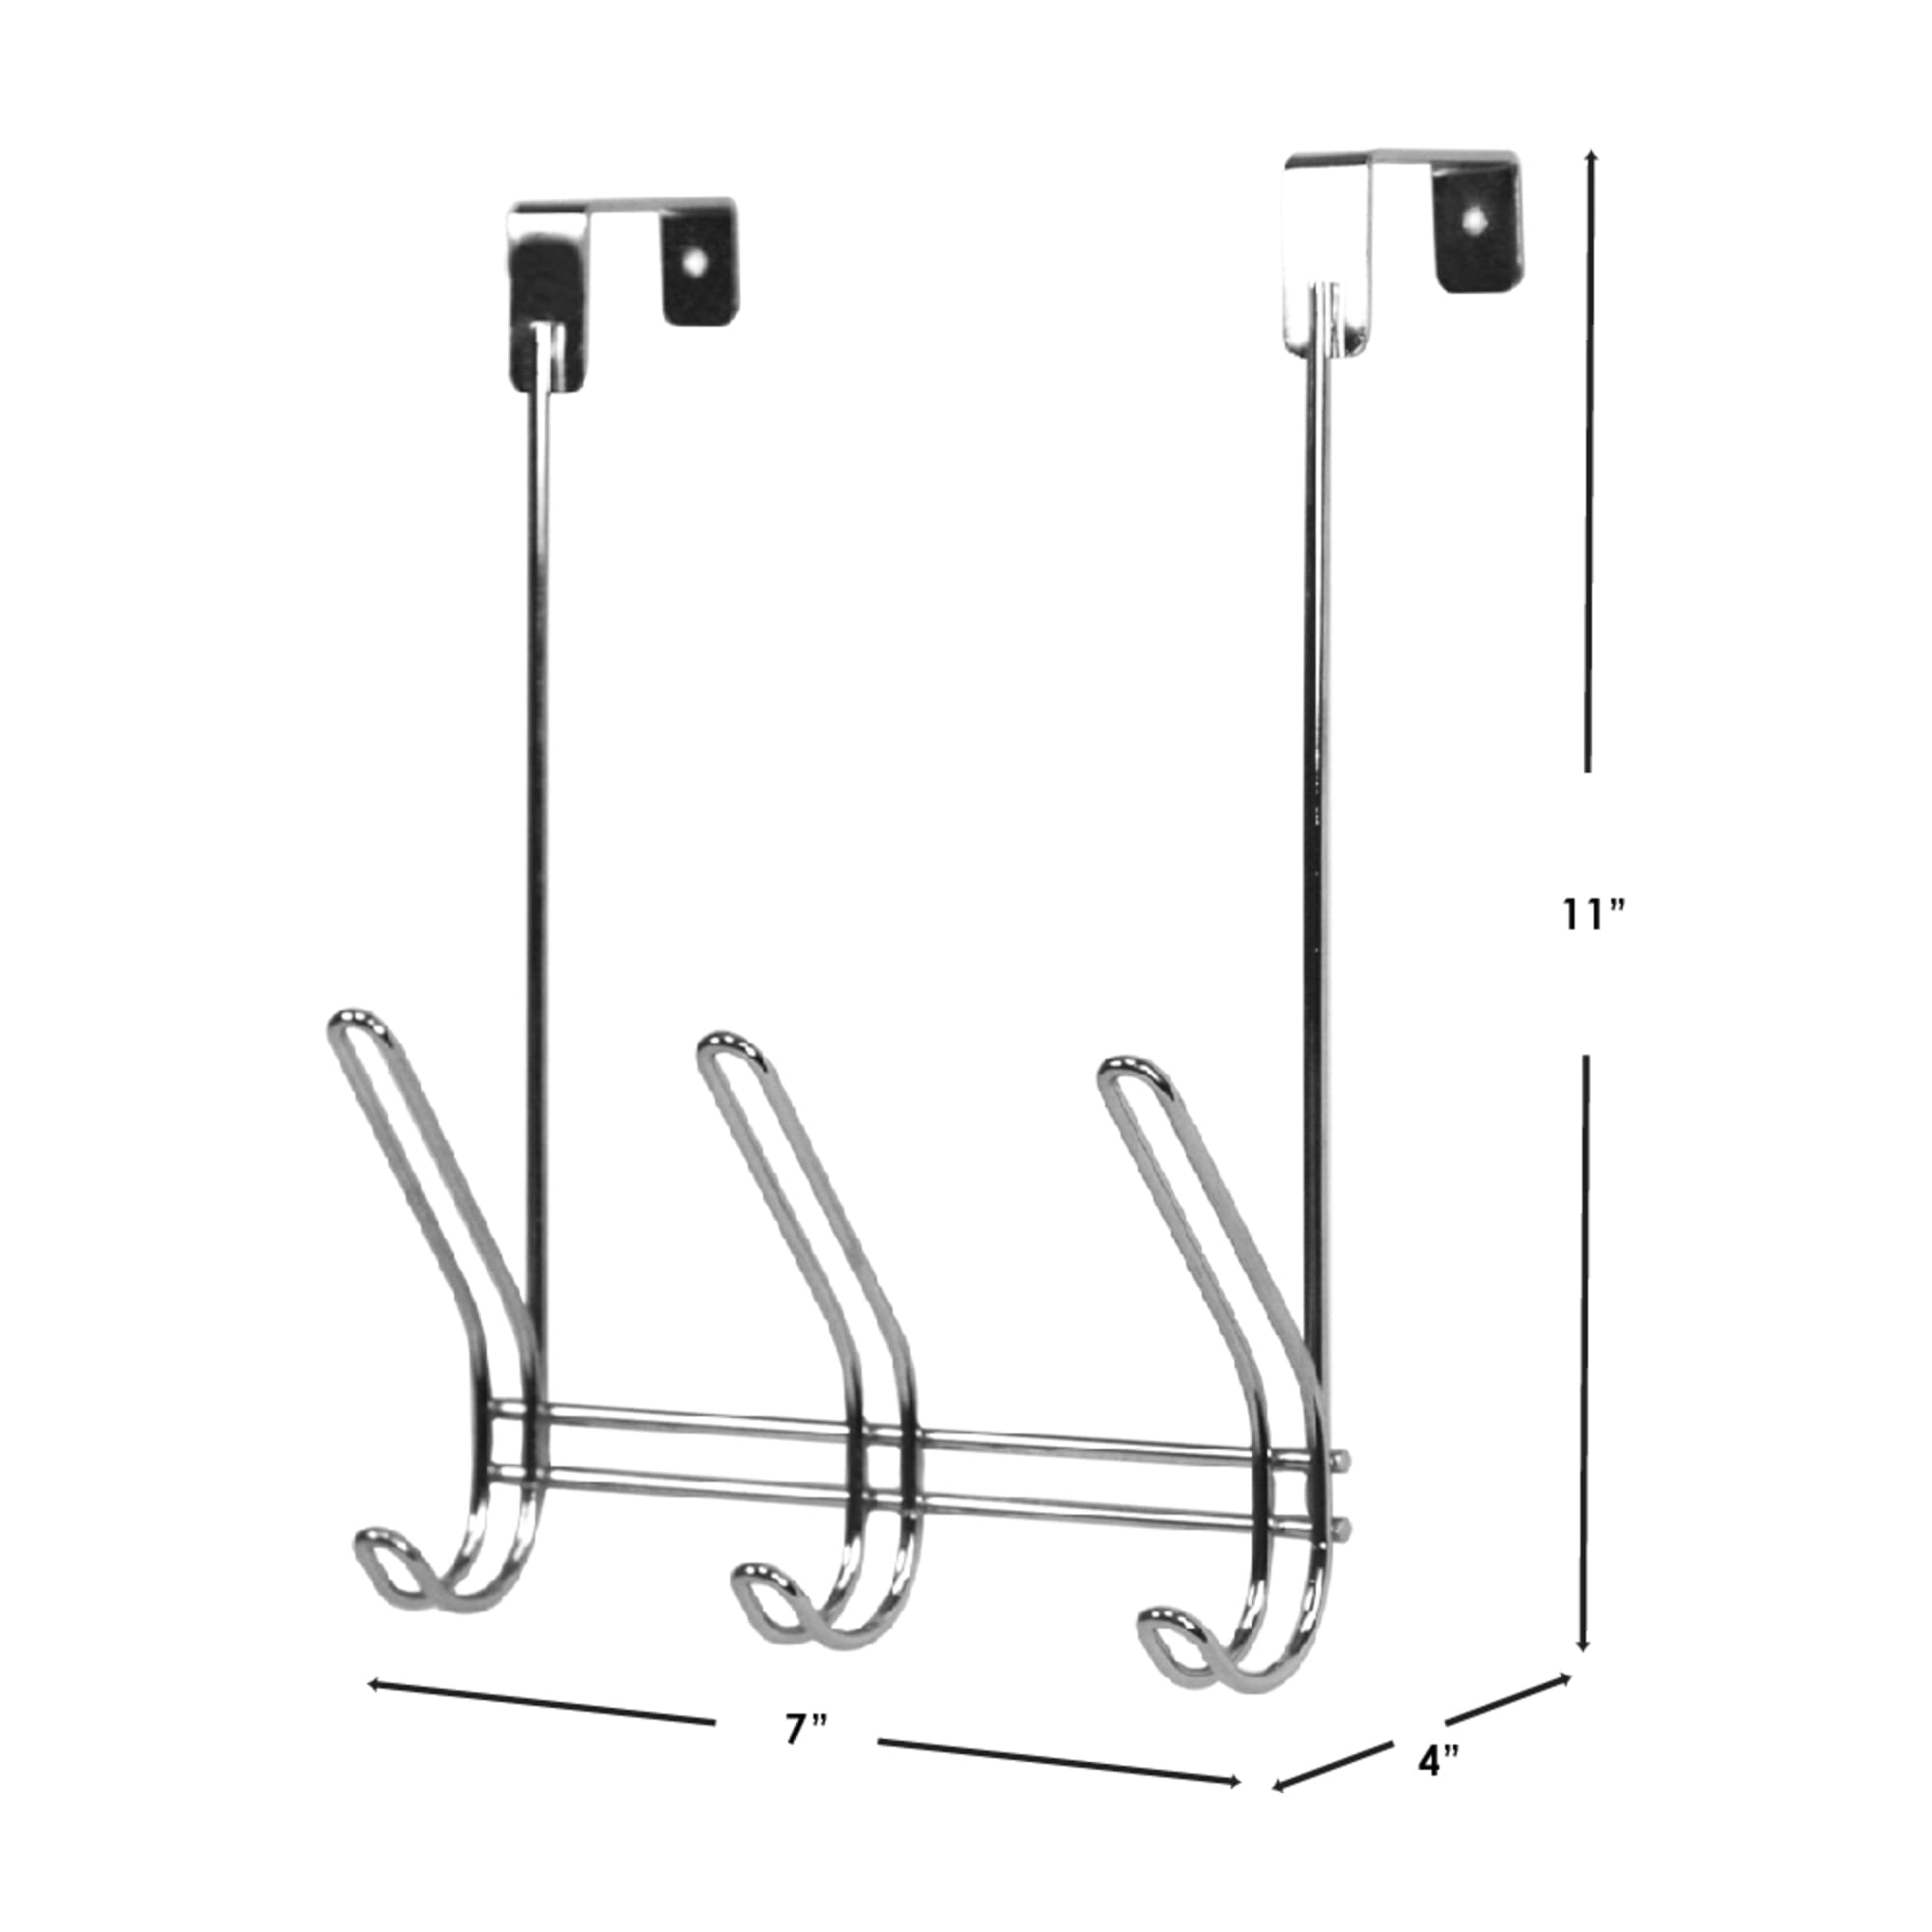 Home Basics 3 Dual Hook Over the Door Steel Organizing Rack, Chrome $3.00 EACH, CASE PACK OF 24